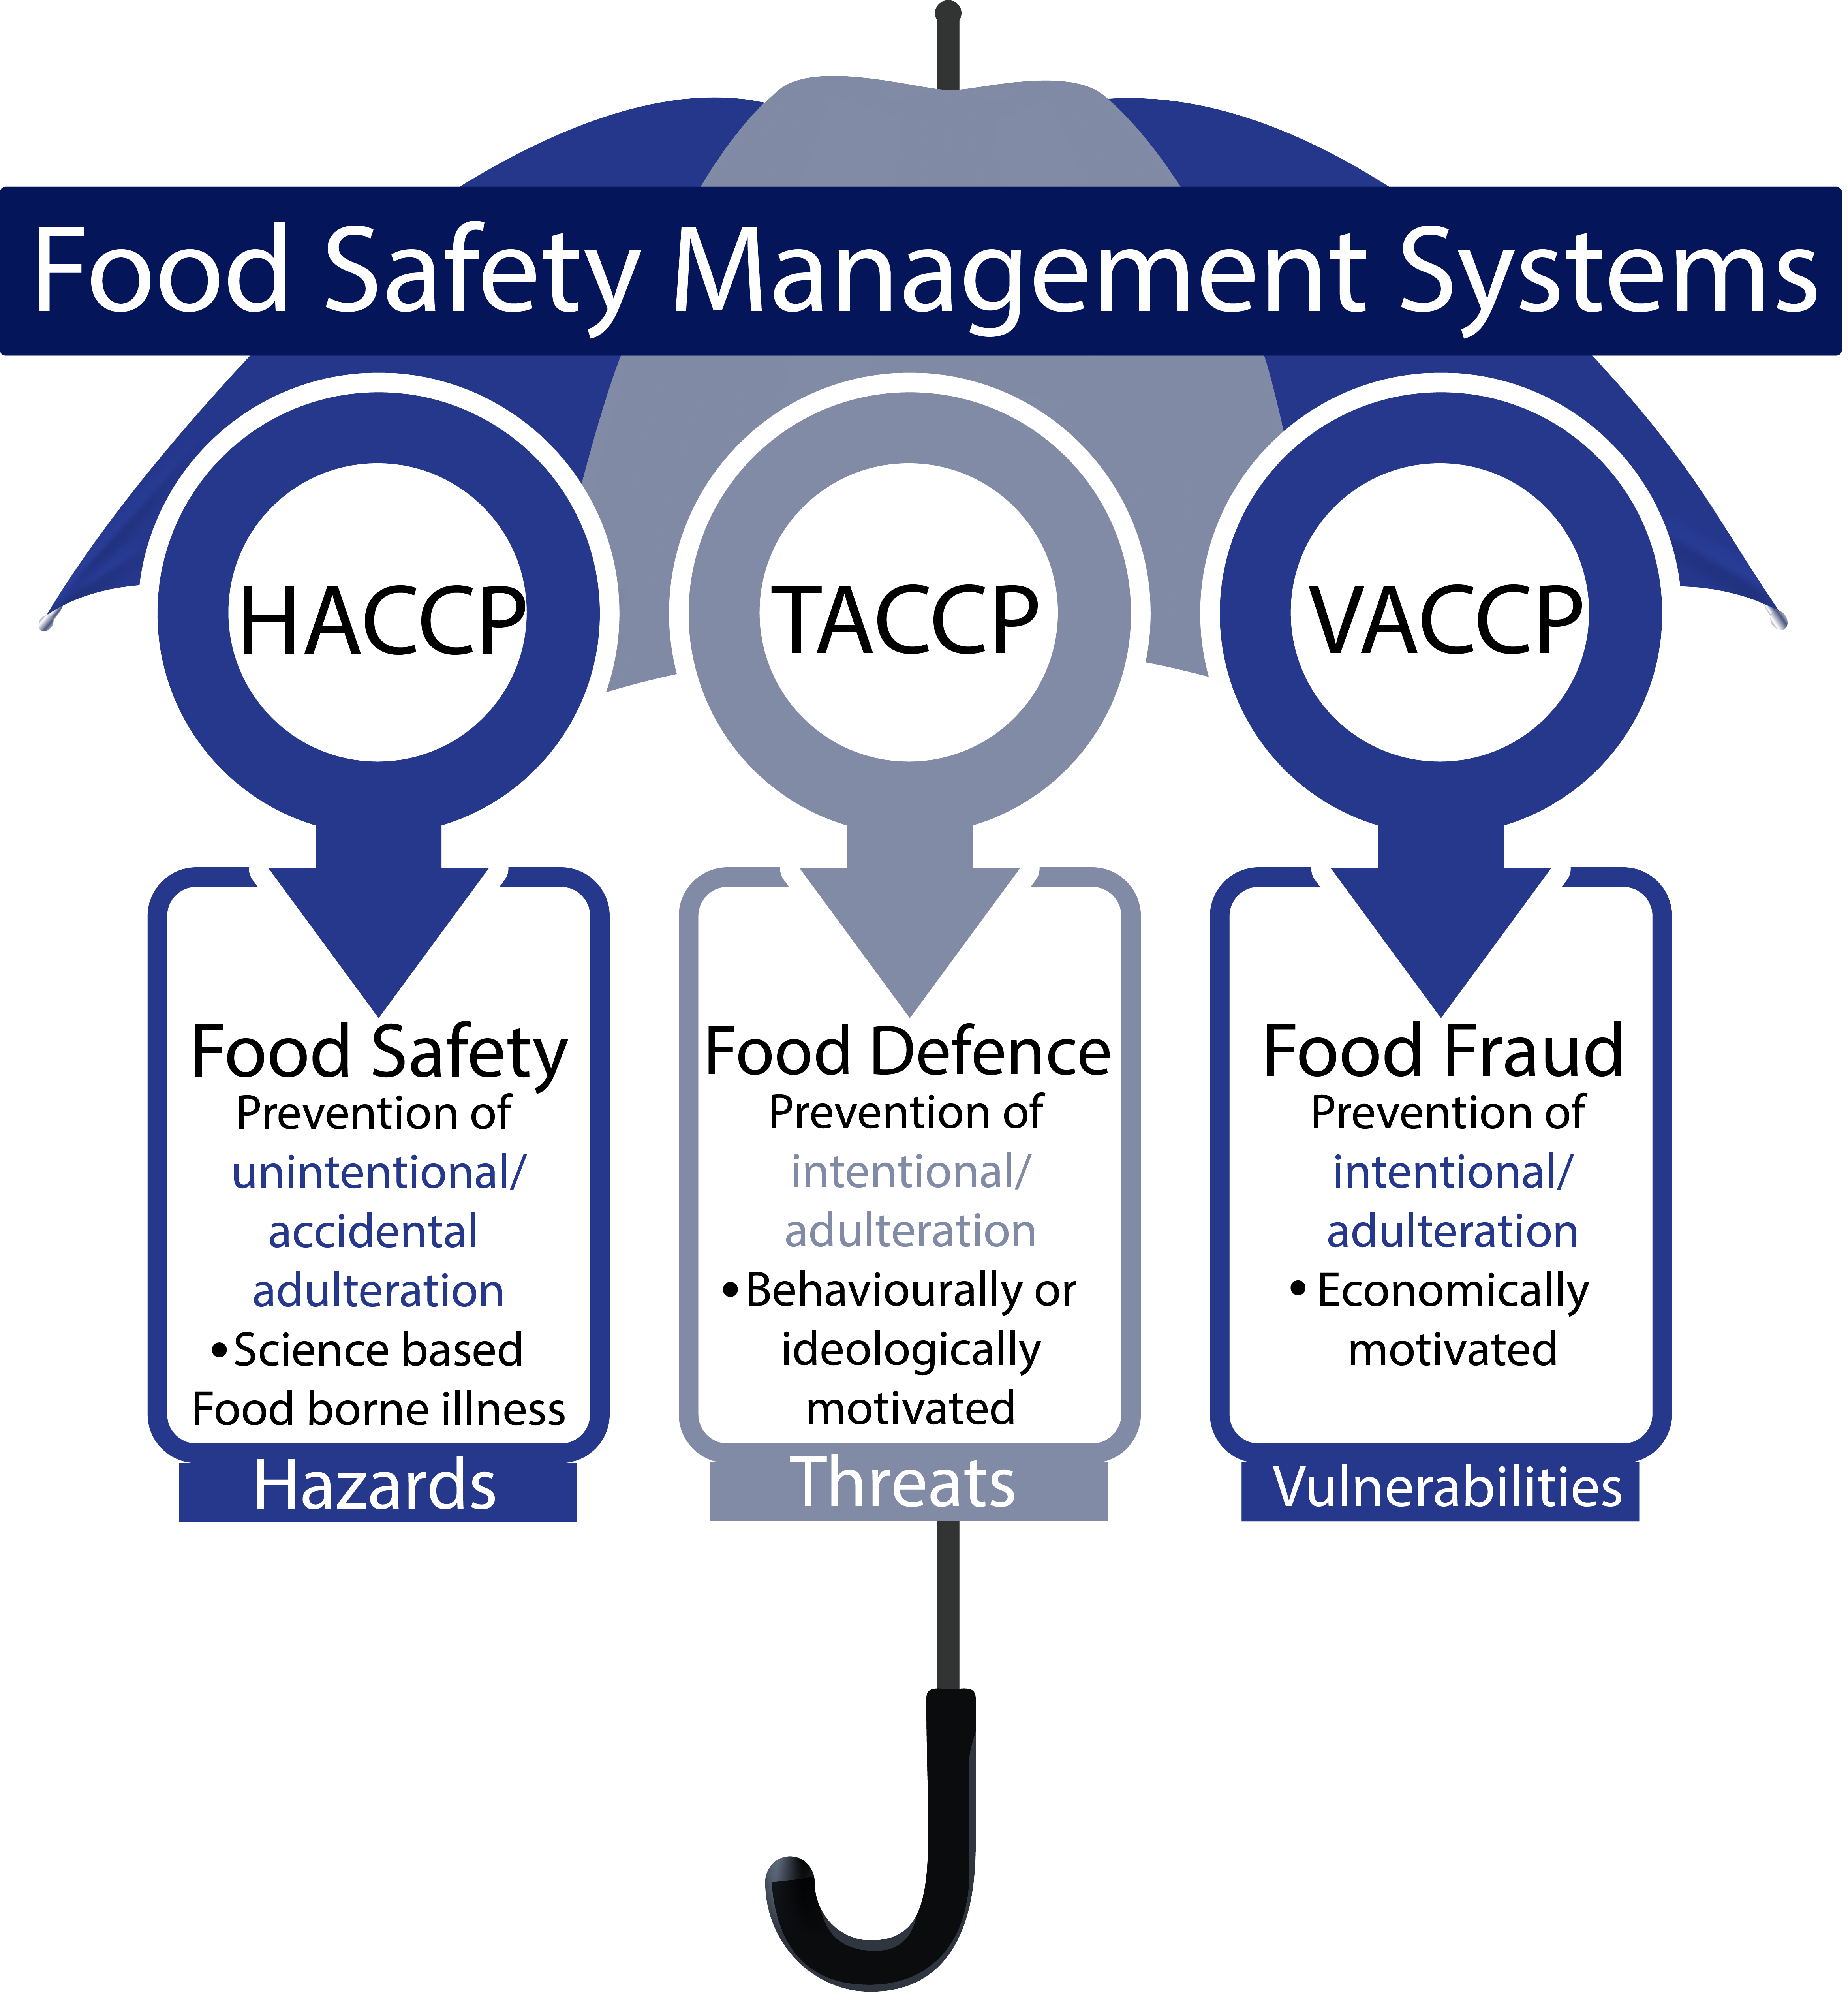 Food Safety Management Systems HACCP_TACCP_VACCP